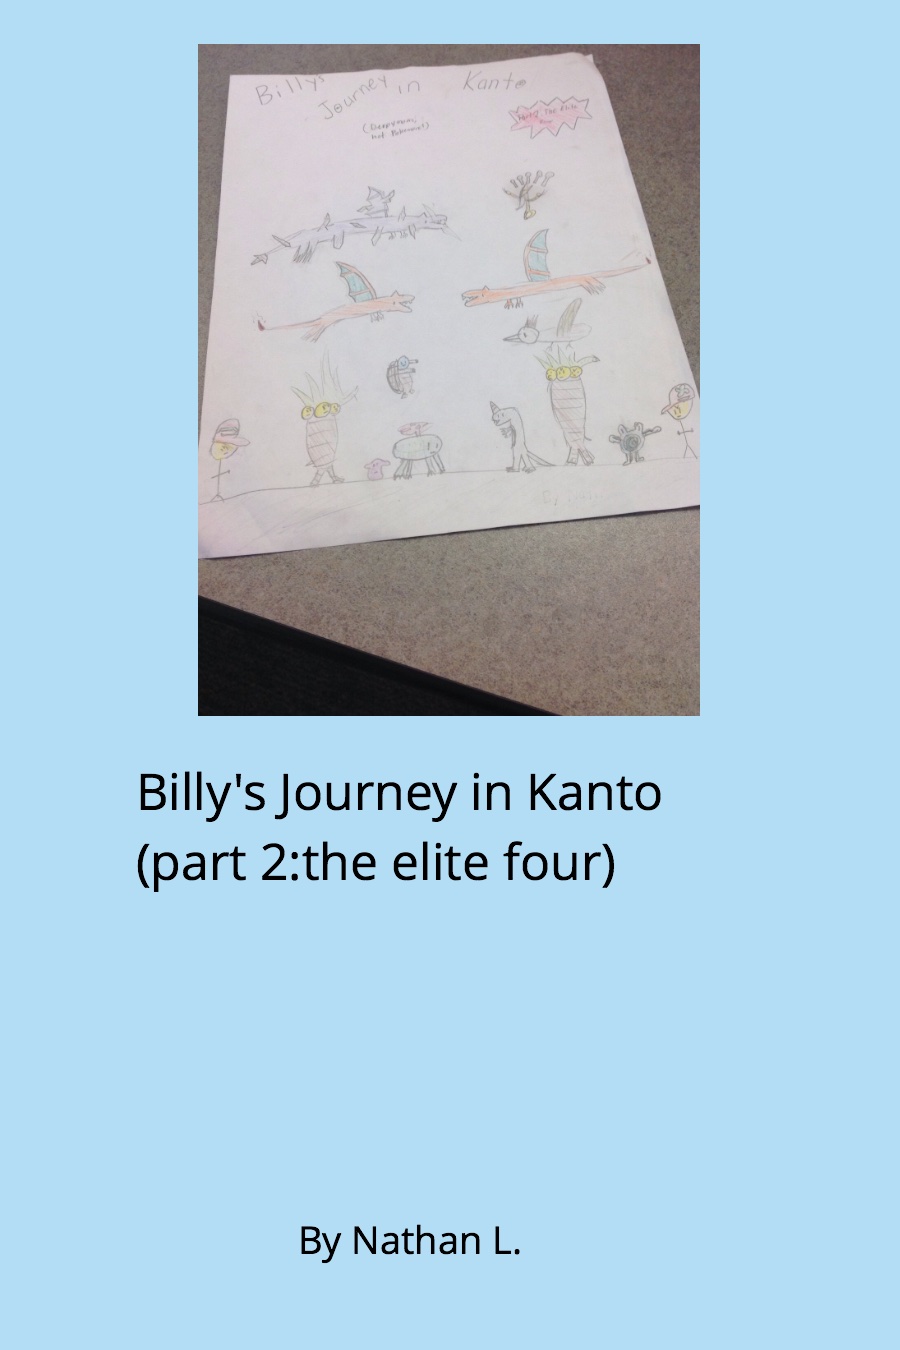 Billy’s Journey in Kanto by nathan L